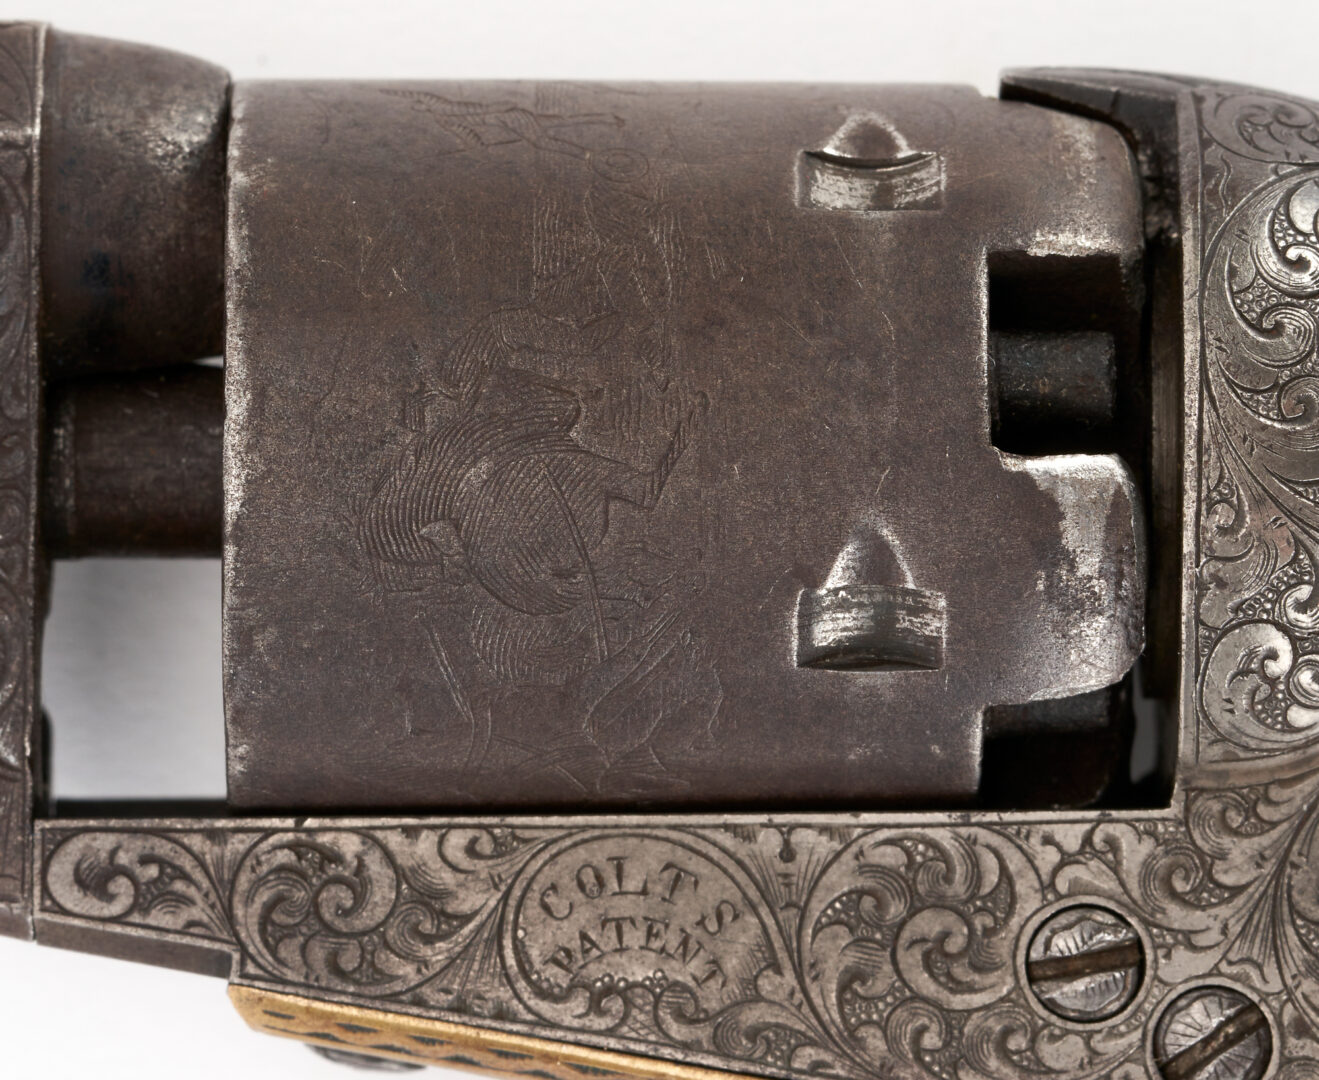 Lot 672: Factory Engraved Colt Model 1849 Revolver w/ Mother of Pearl Grips, .31 cal.